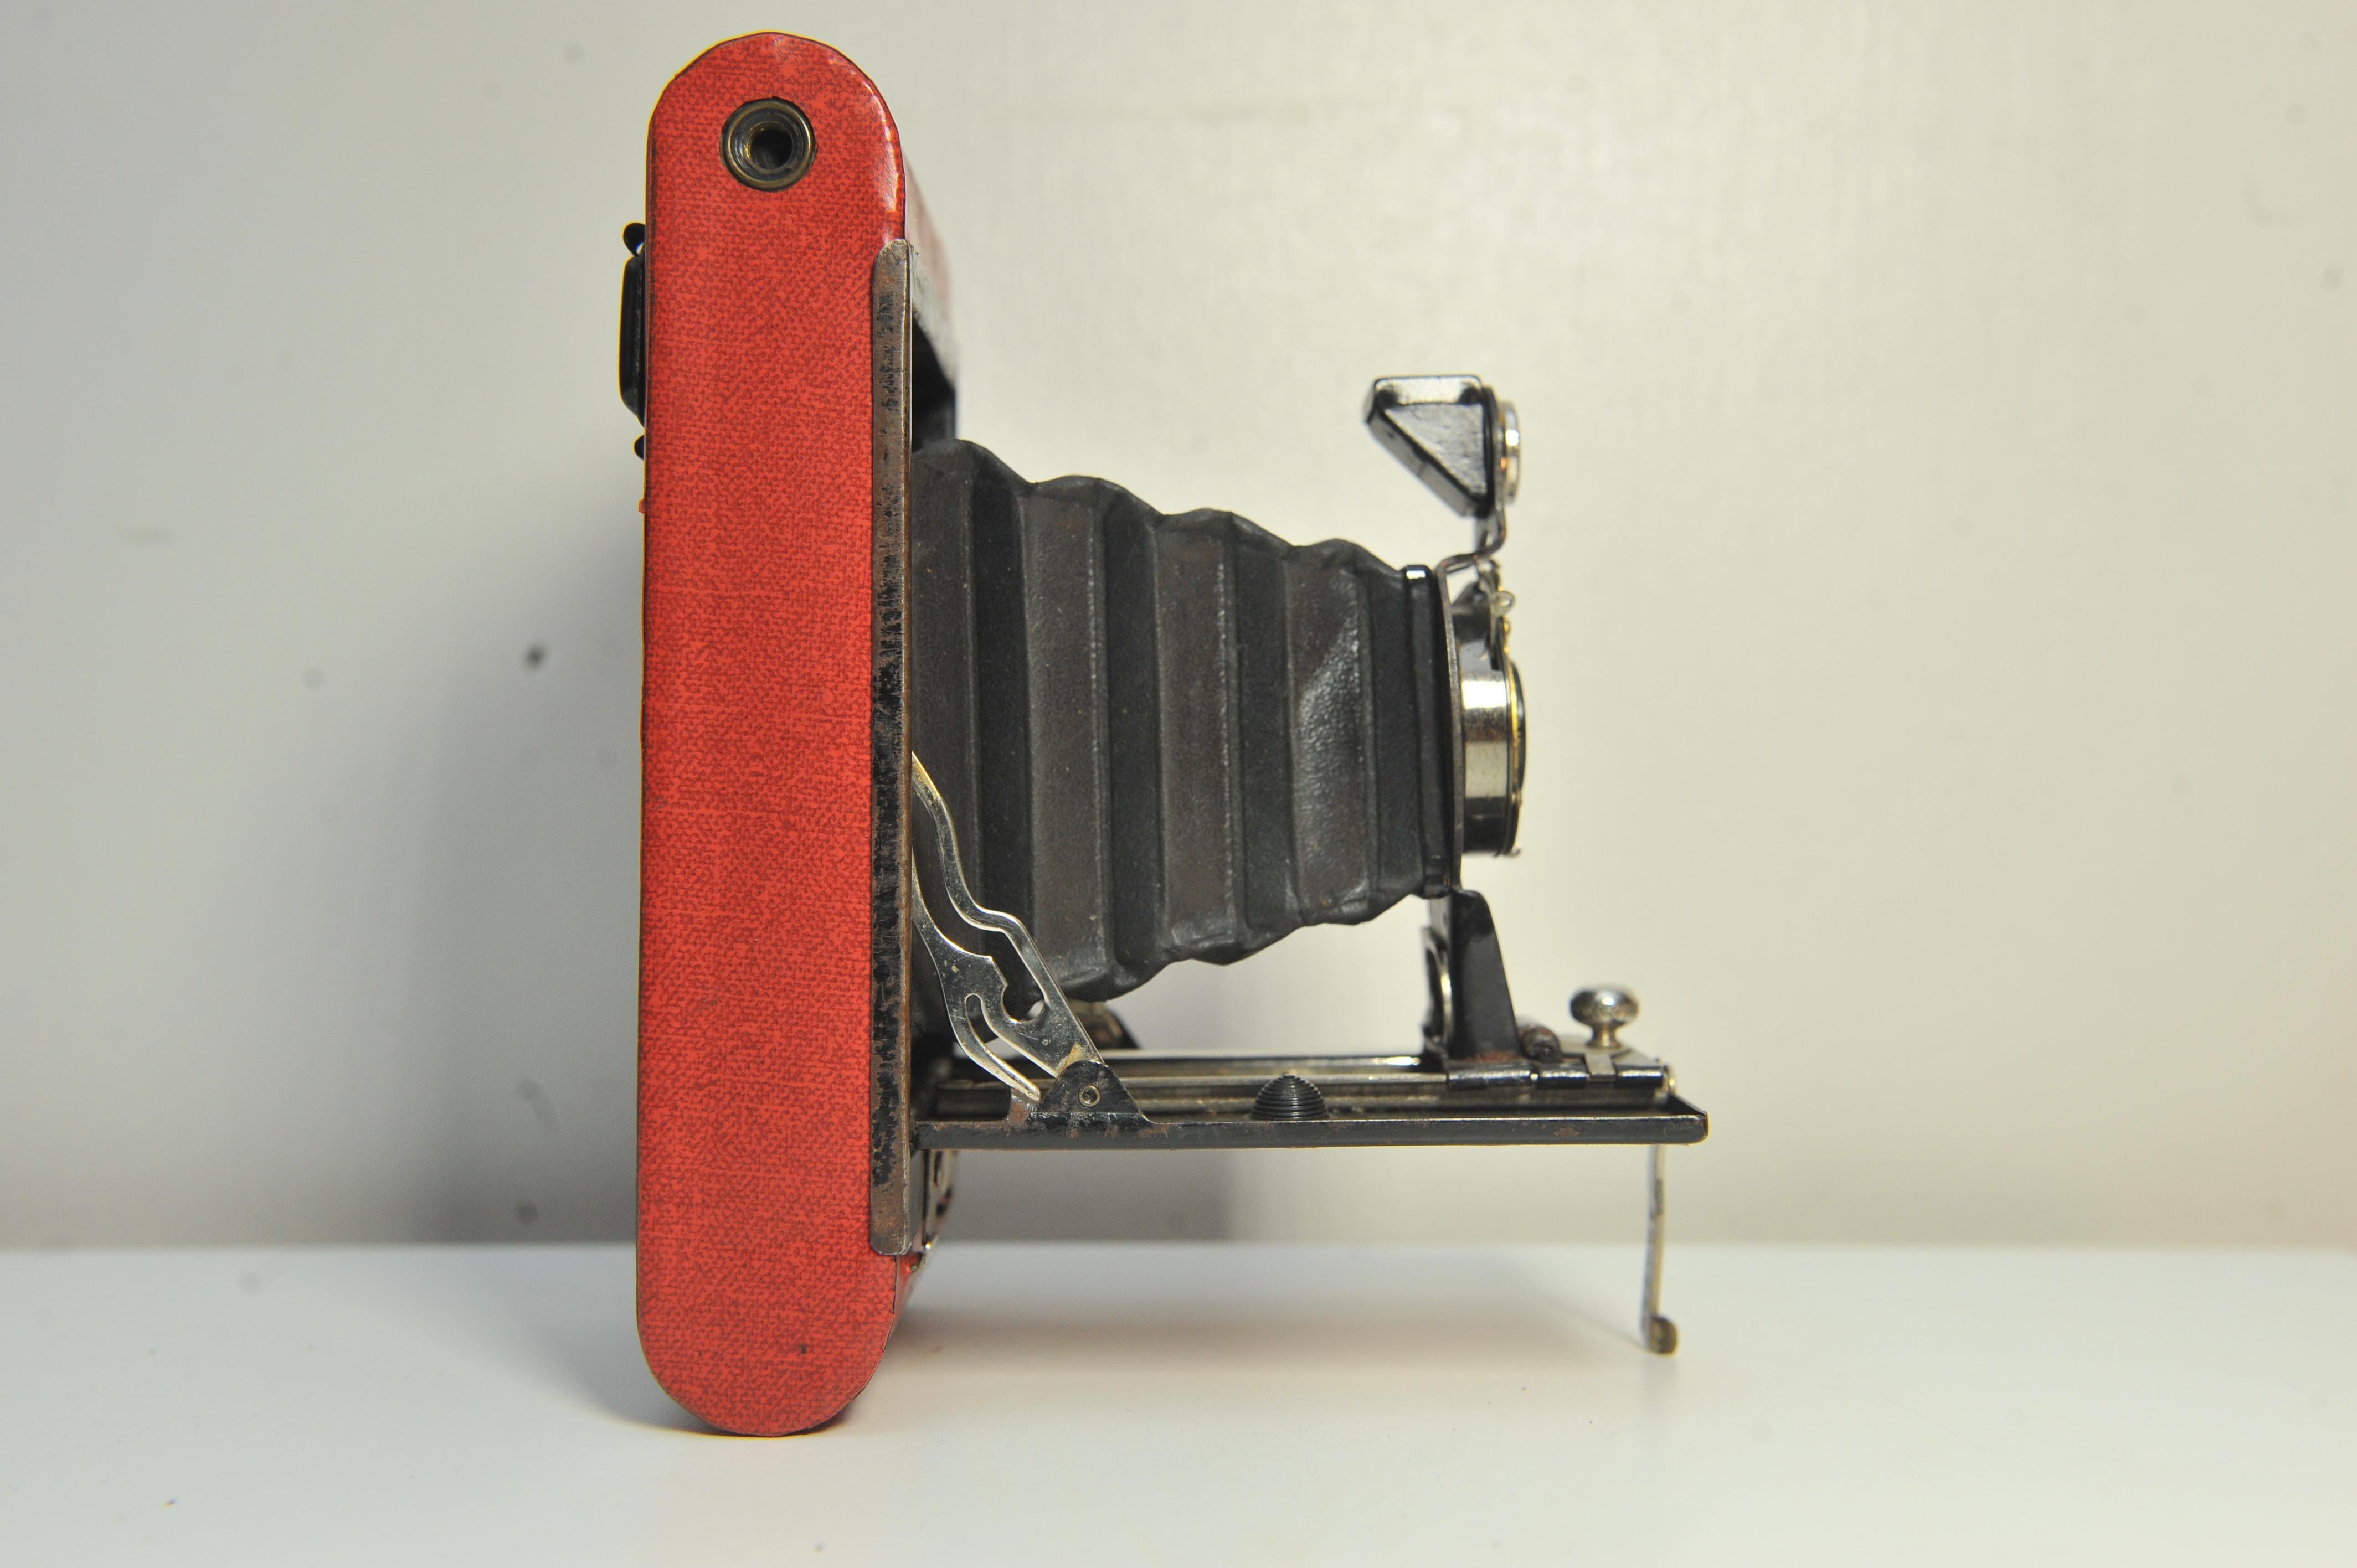 Eastman Kodak No 2 Folding Autographic Brownie Folding Bellow Camera In Red For Sale 1